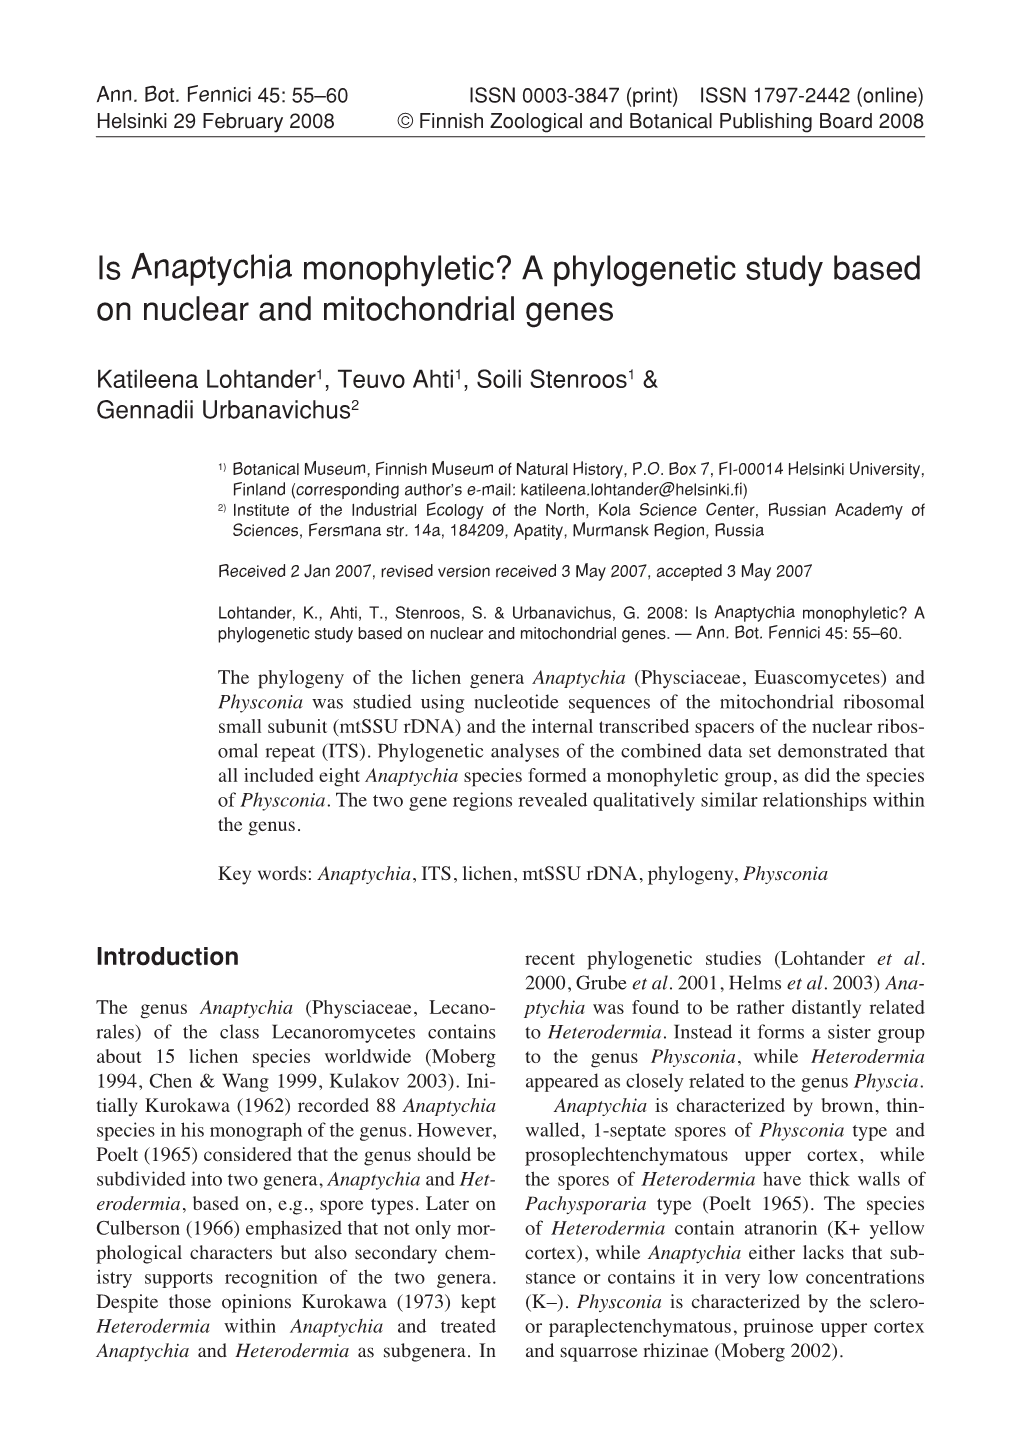 Is Anaptychia Monophyletic? a Phylogenetic Study Based on Nuclear and Mitochondrial Genes